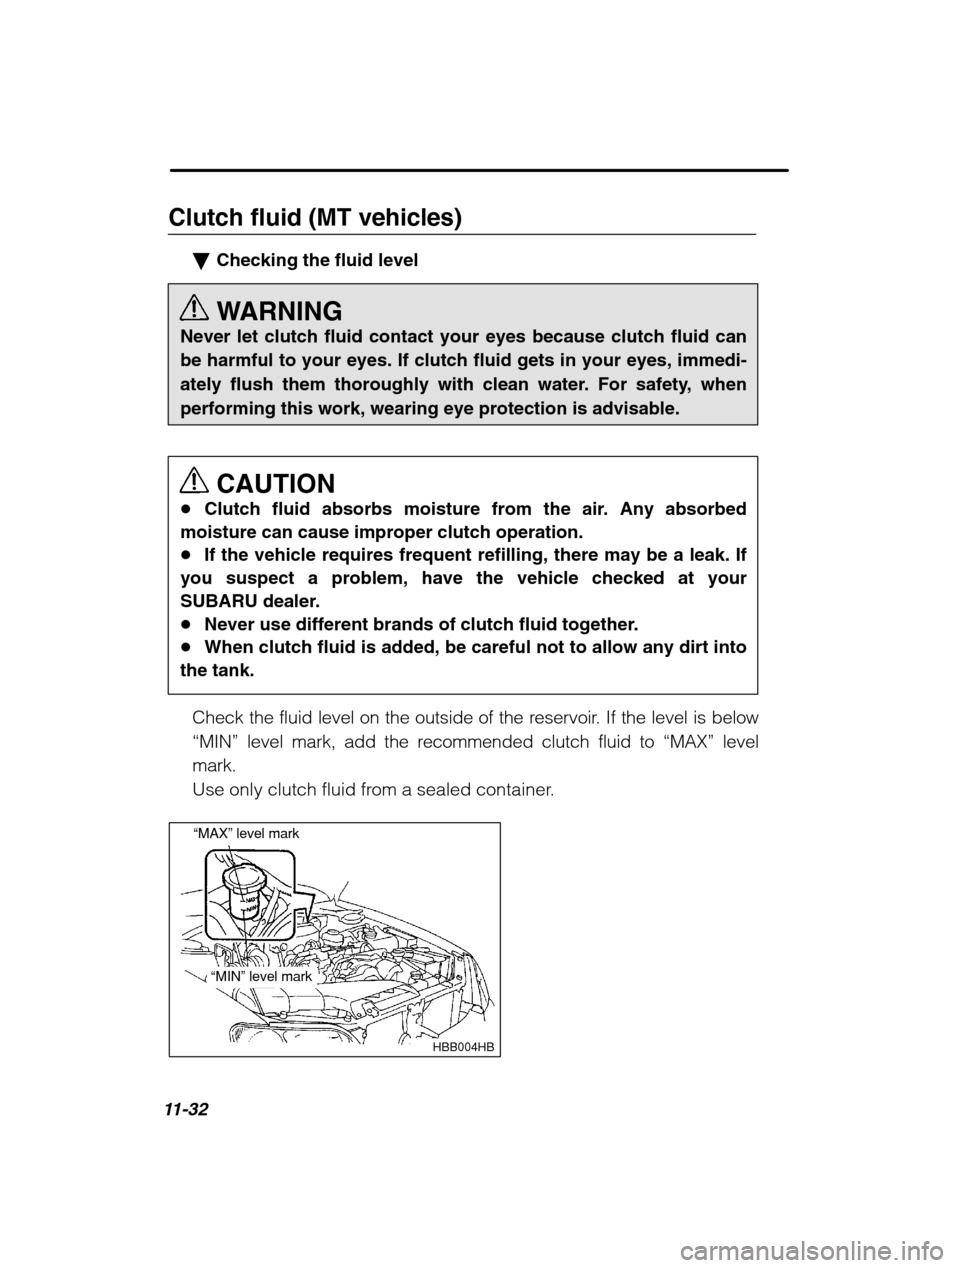 SUBARU LEGACY 2002 3.G Owners Manual 11-32
Clutch fluid (MT vehicles)�Checking the fluid level 
WARNING
Never let clutch fluid contact your eyes because clutch fluid can 
be harmful to your eyes. If clutch fluid gets in your eyes, immedi